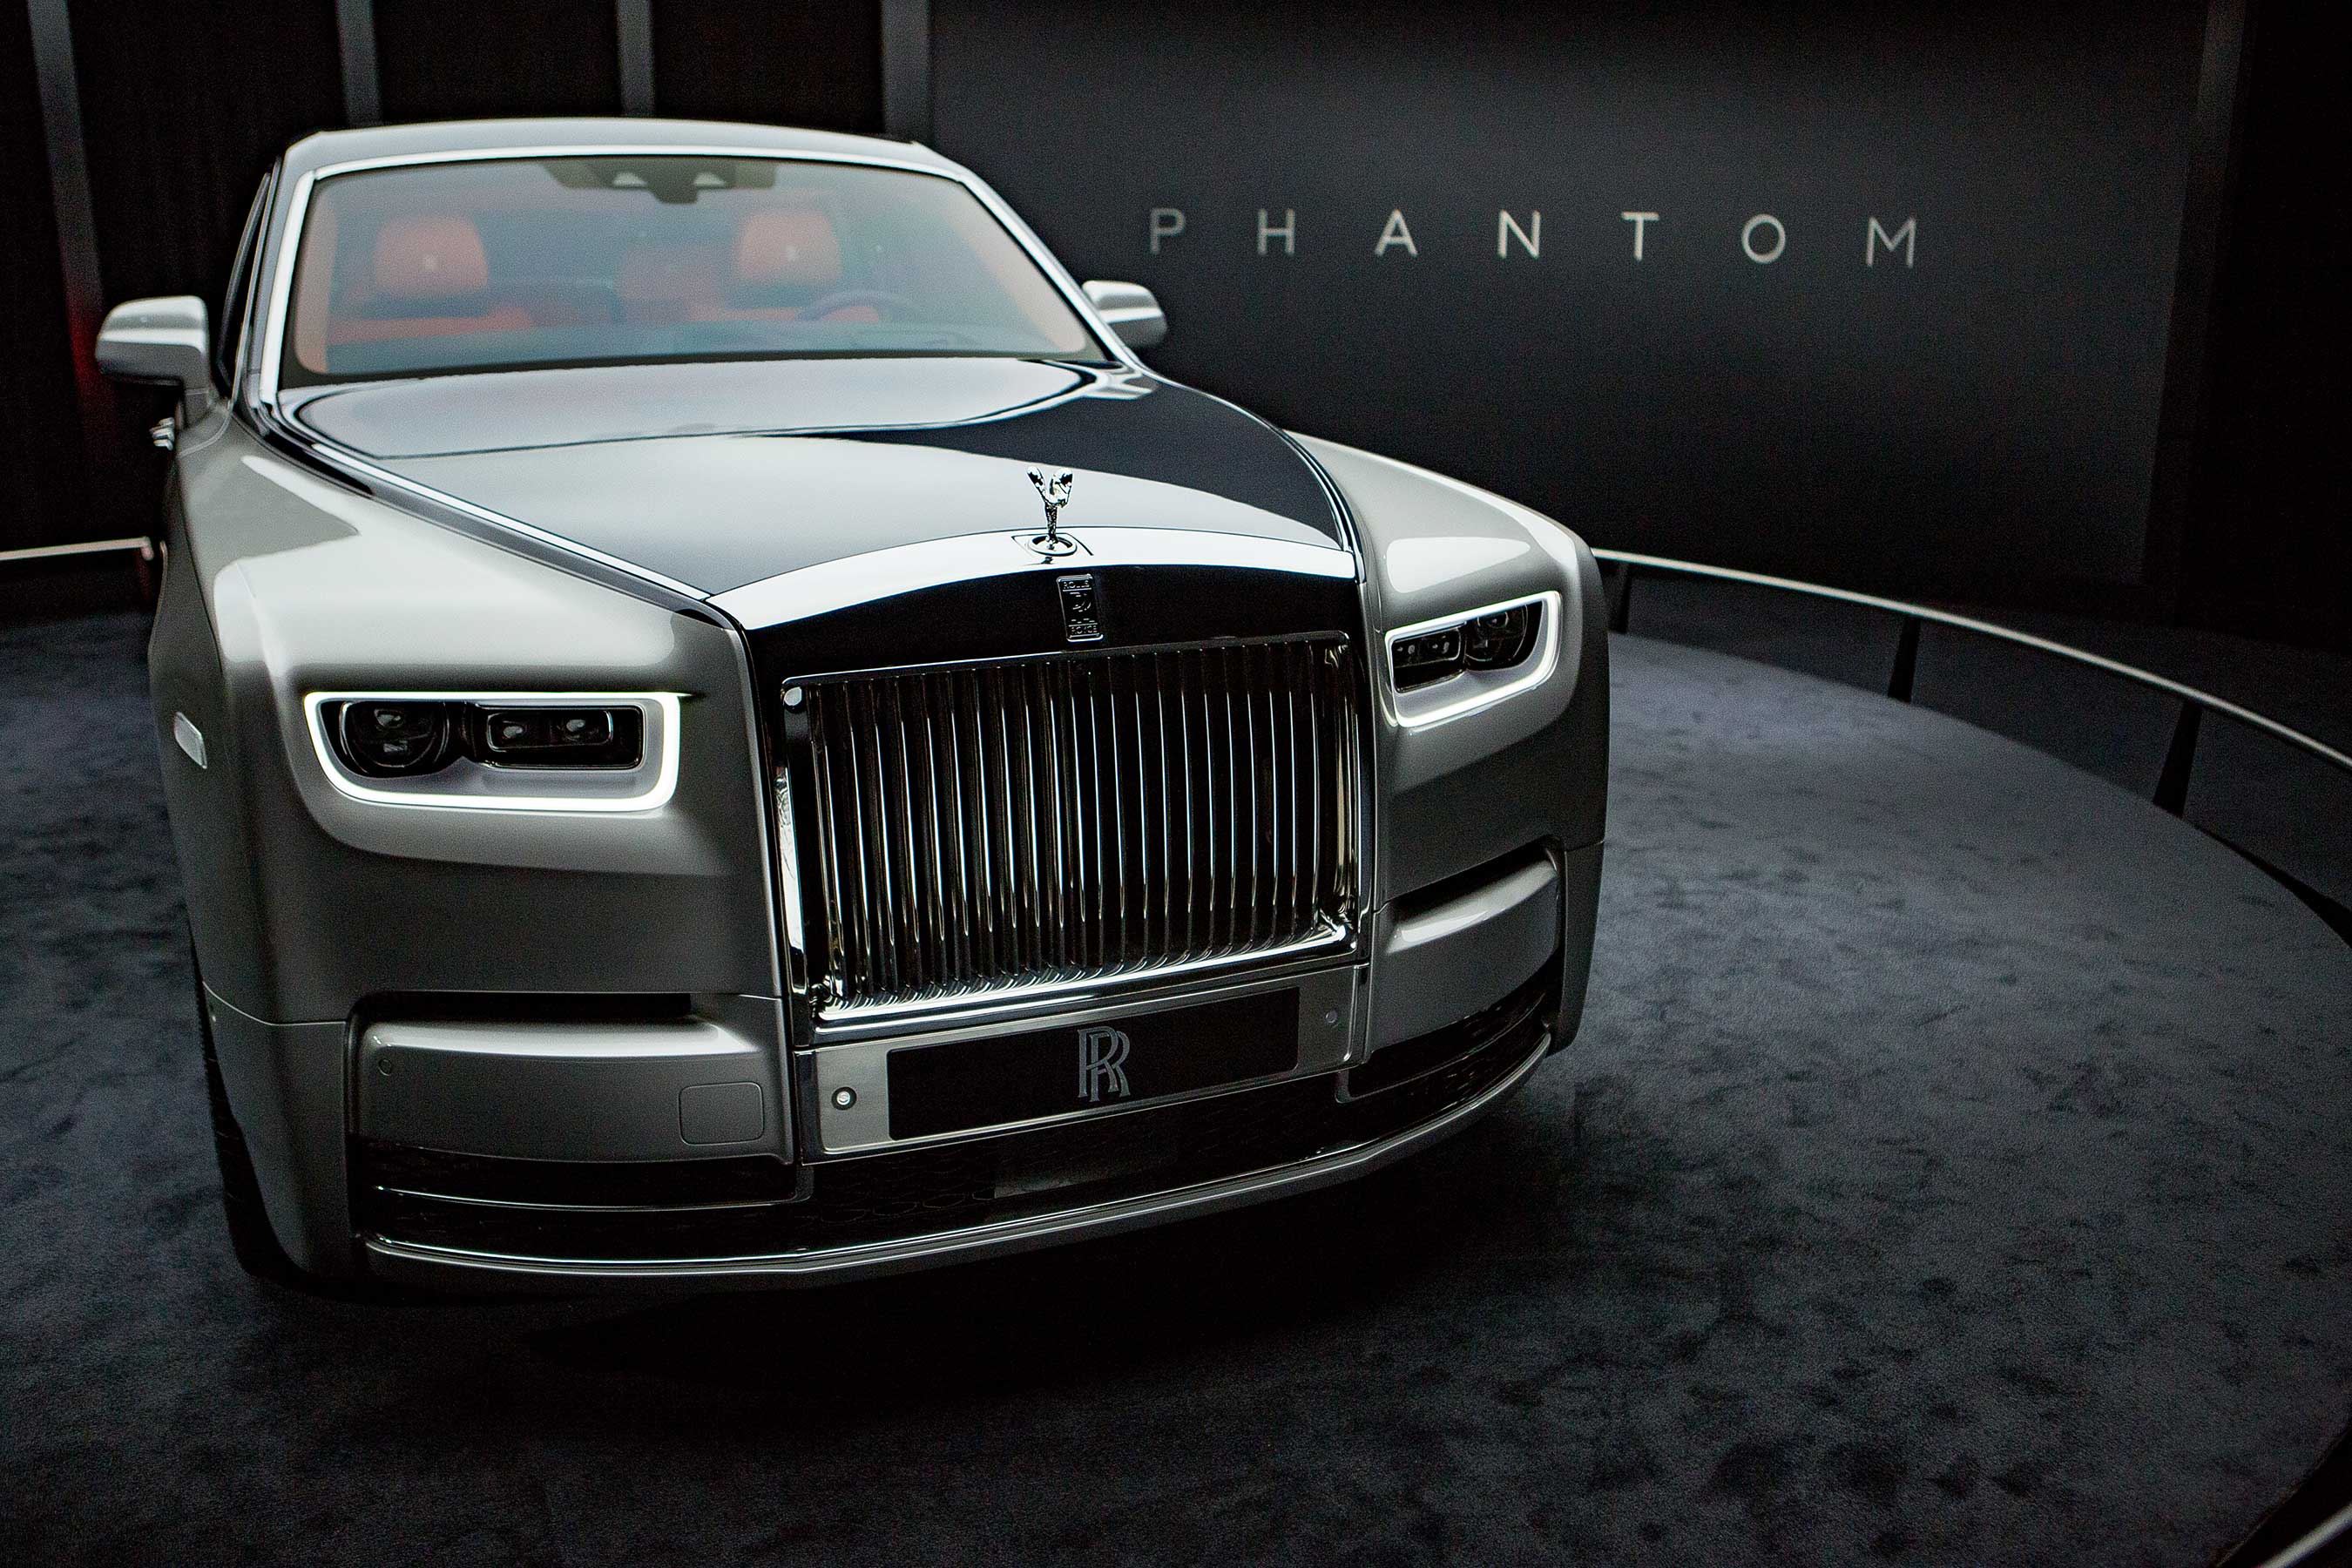 The design of the New Phantom DNA offers an aluminum ‘Architecture of Luxury’ which underpins the Phantom delivers a new level of ‘Magic Carpet Ride:’ lighter, stiffer, quieter than ever.